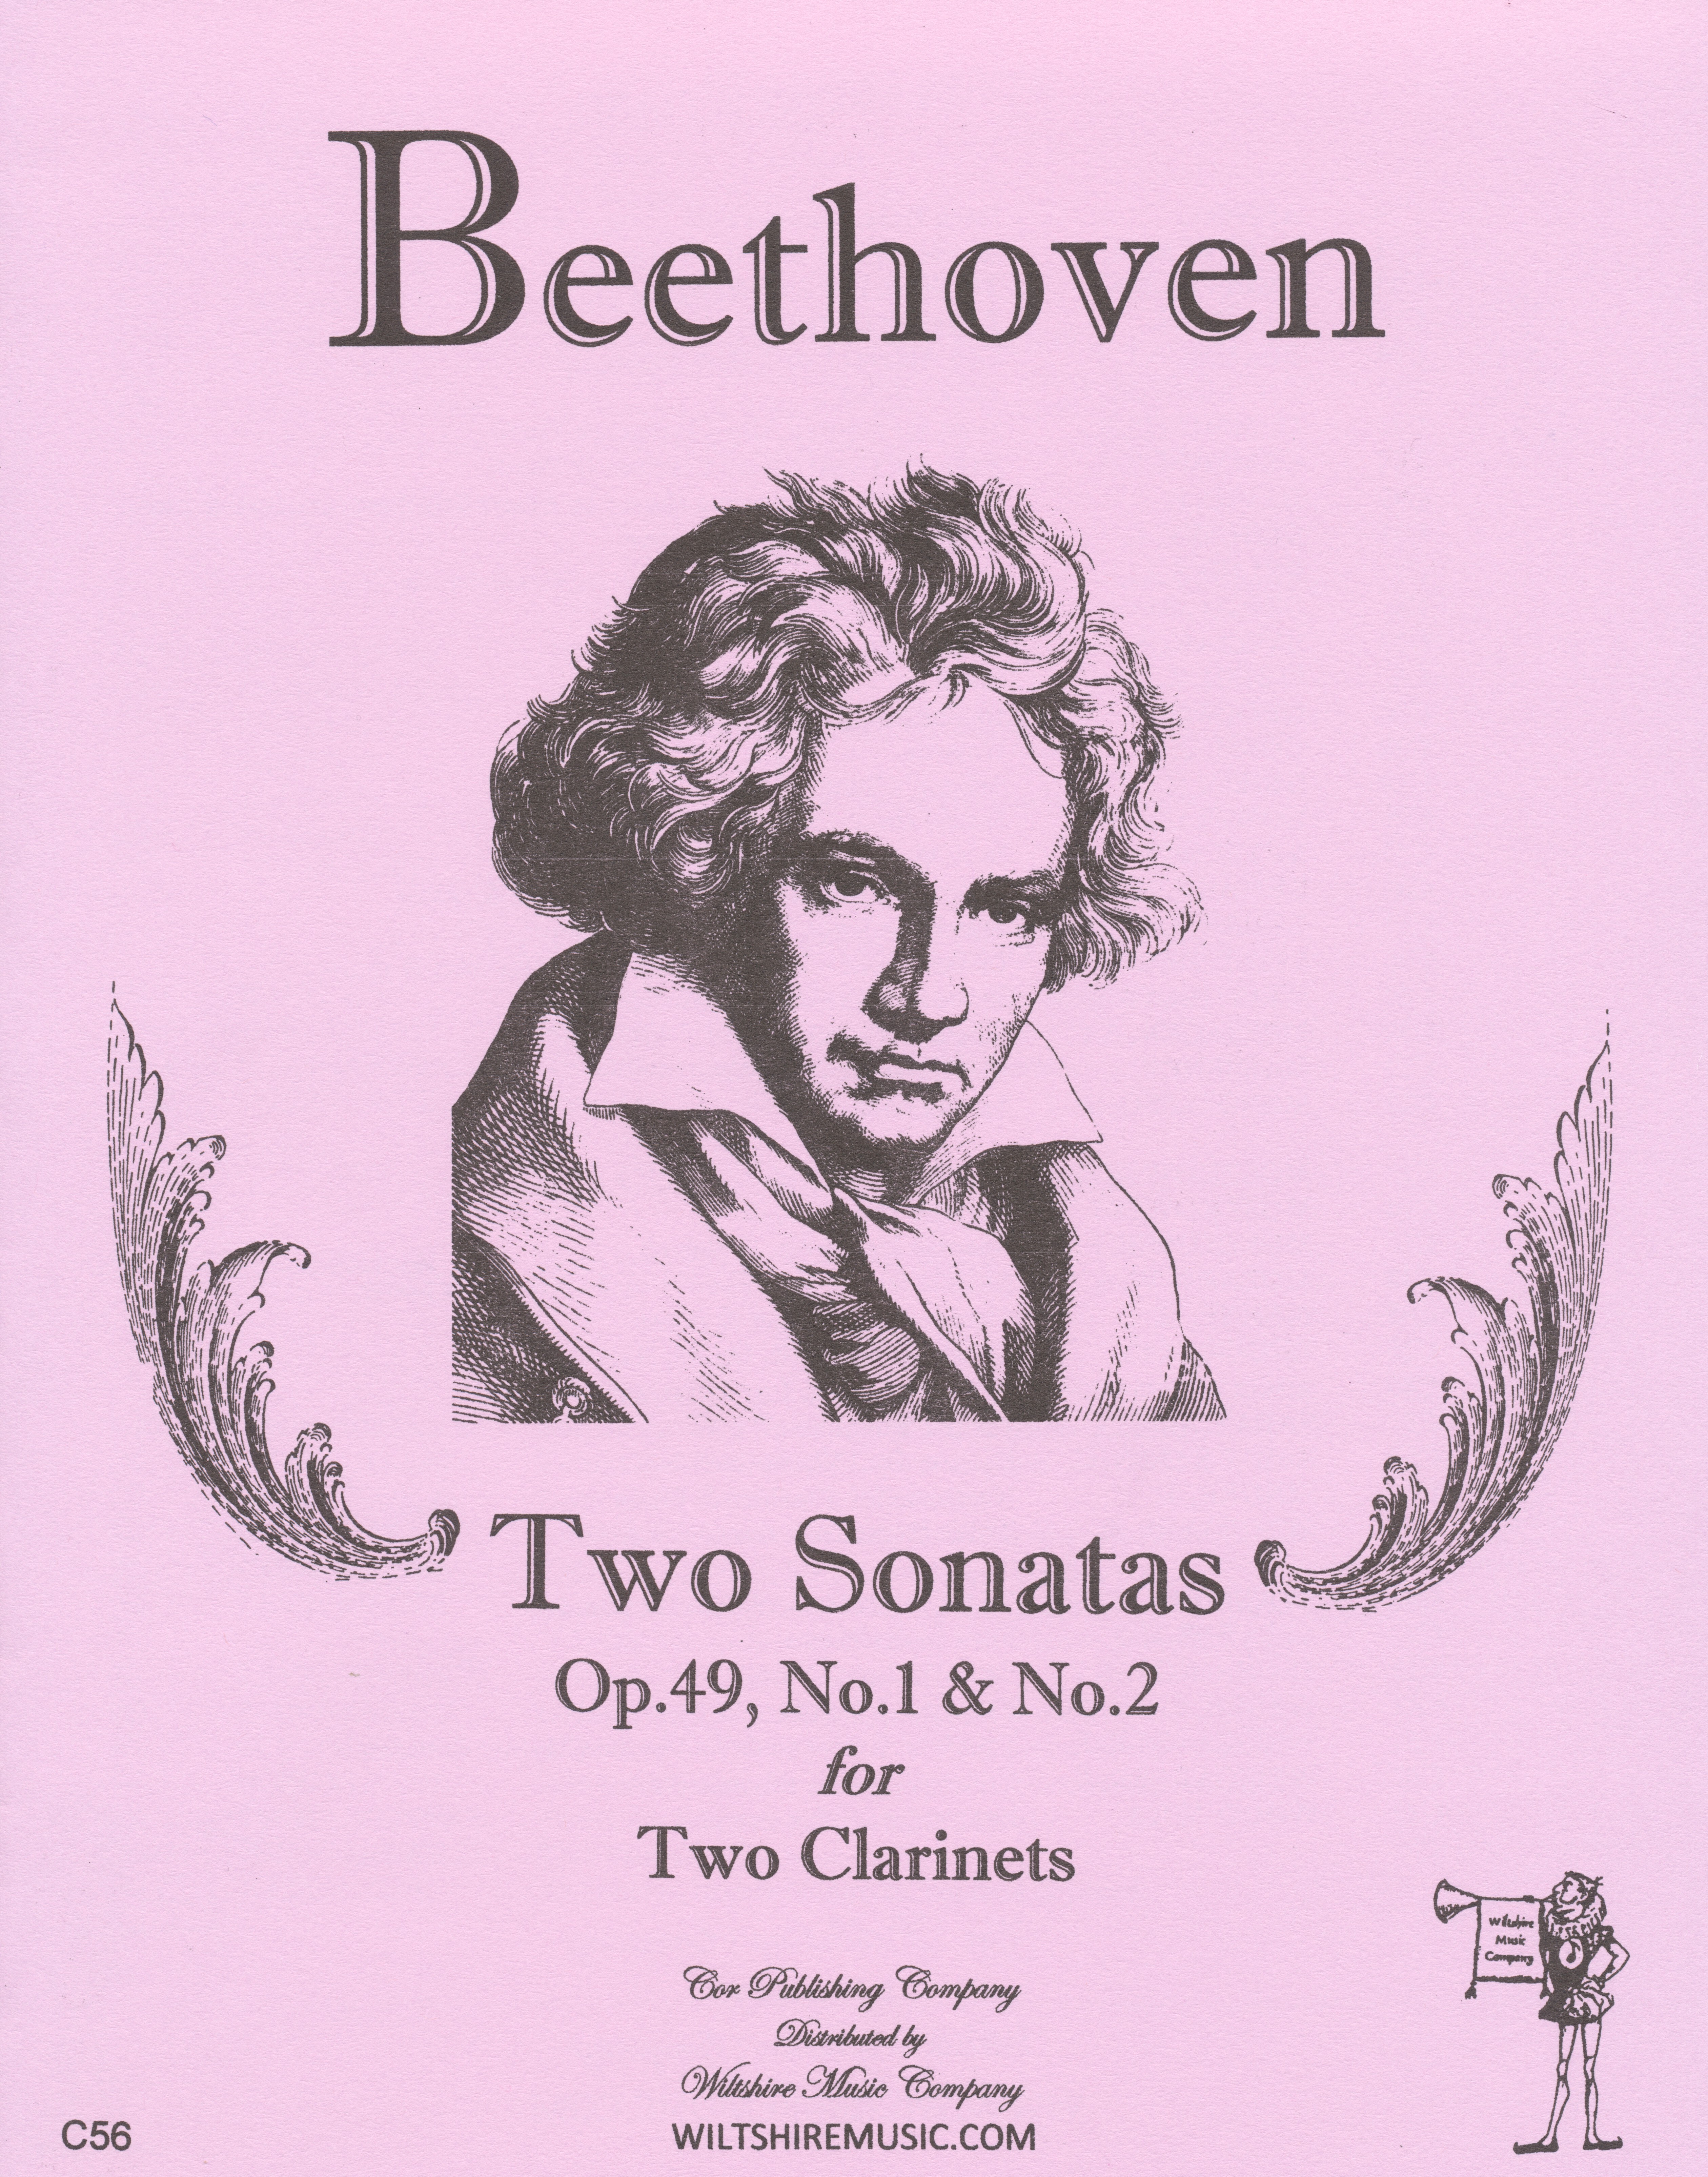 2 Sonatas,Op.49, Beethoven, for 2 clarinets